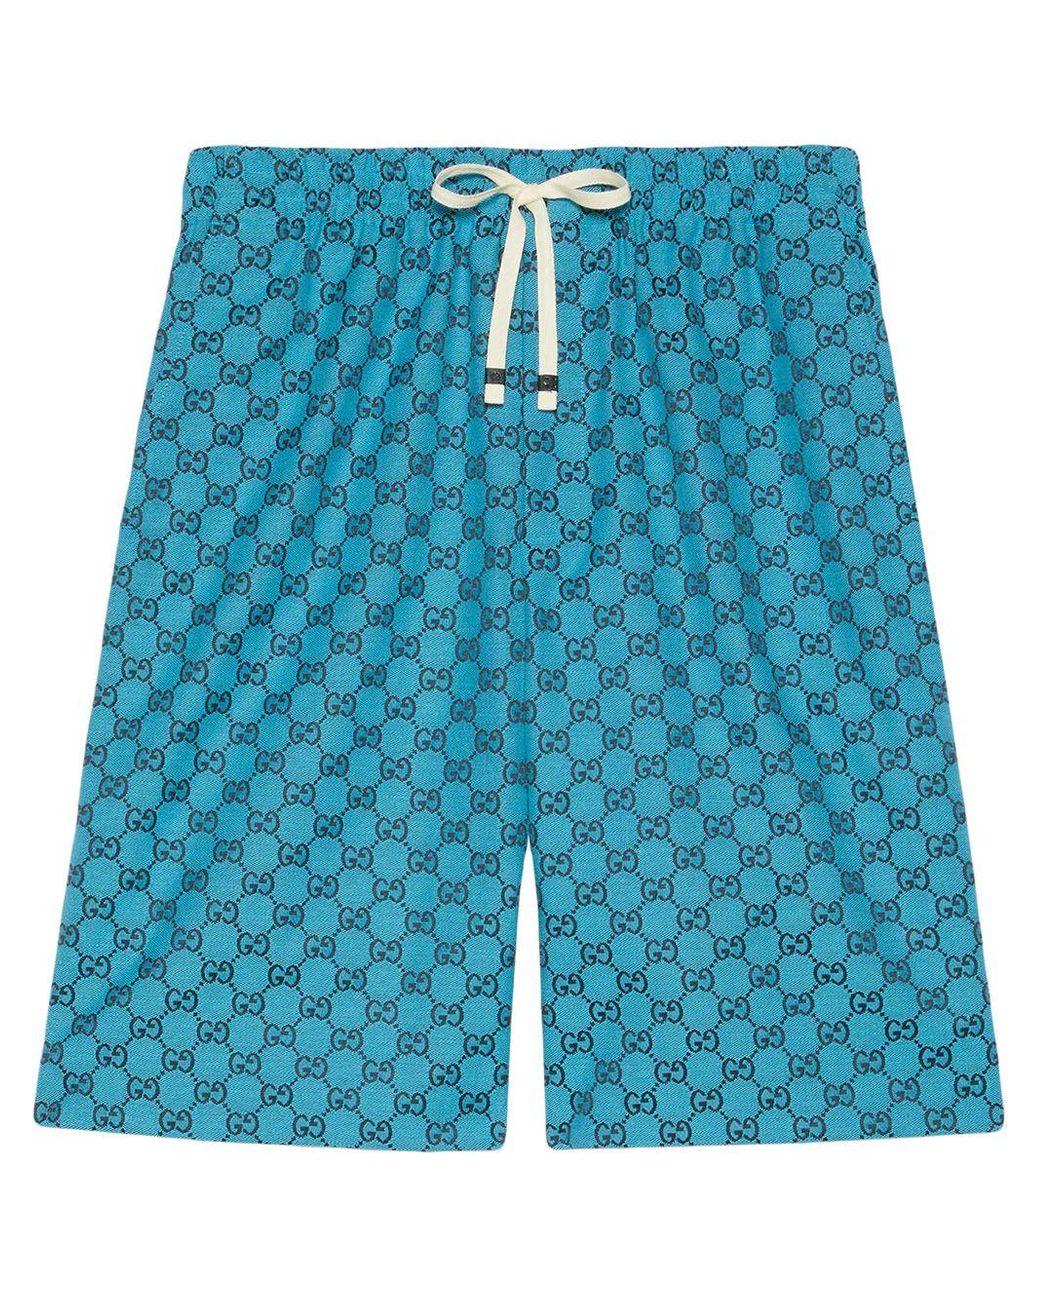 Gucci Pleated shorts with logo pattern, Women's Clothing